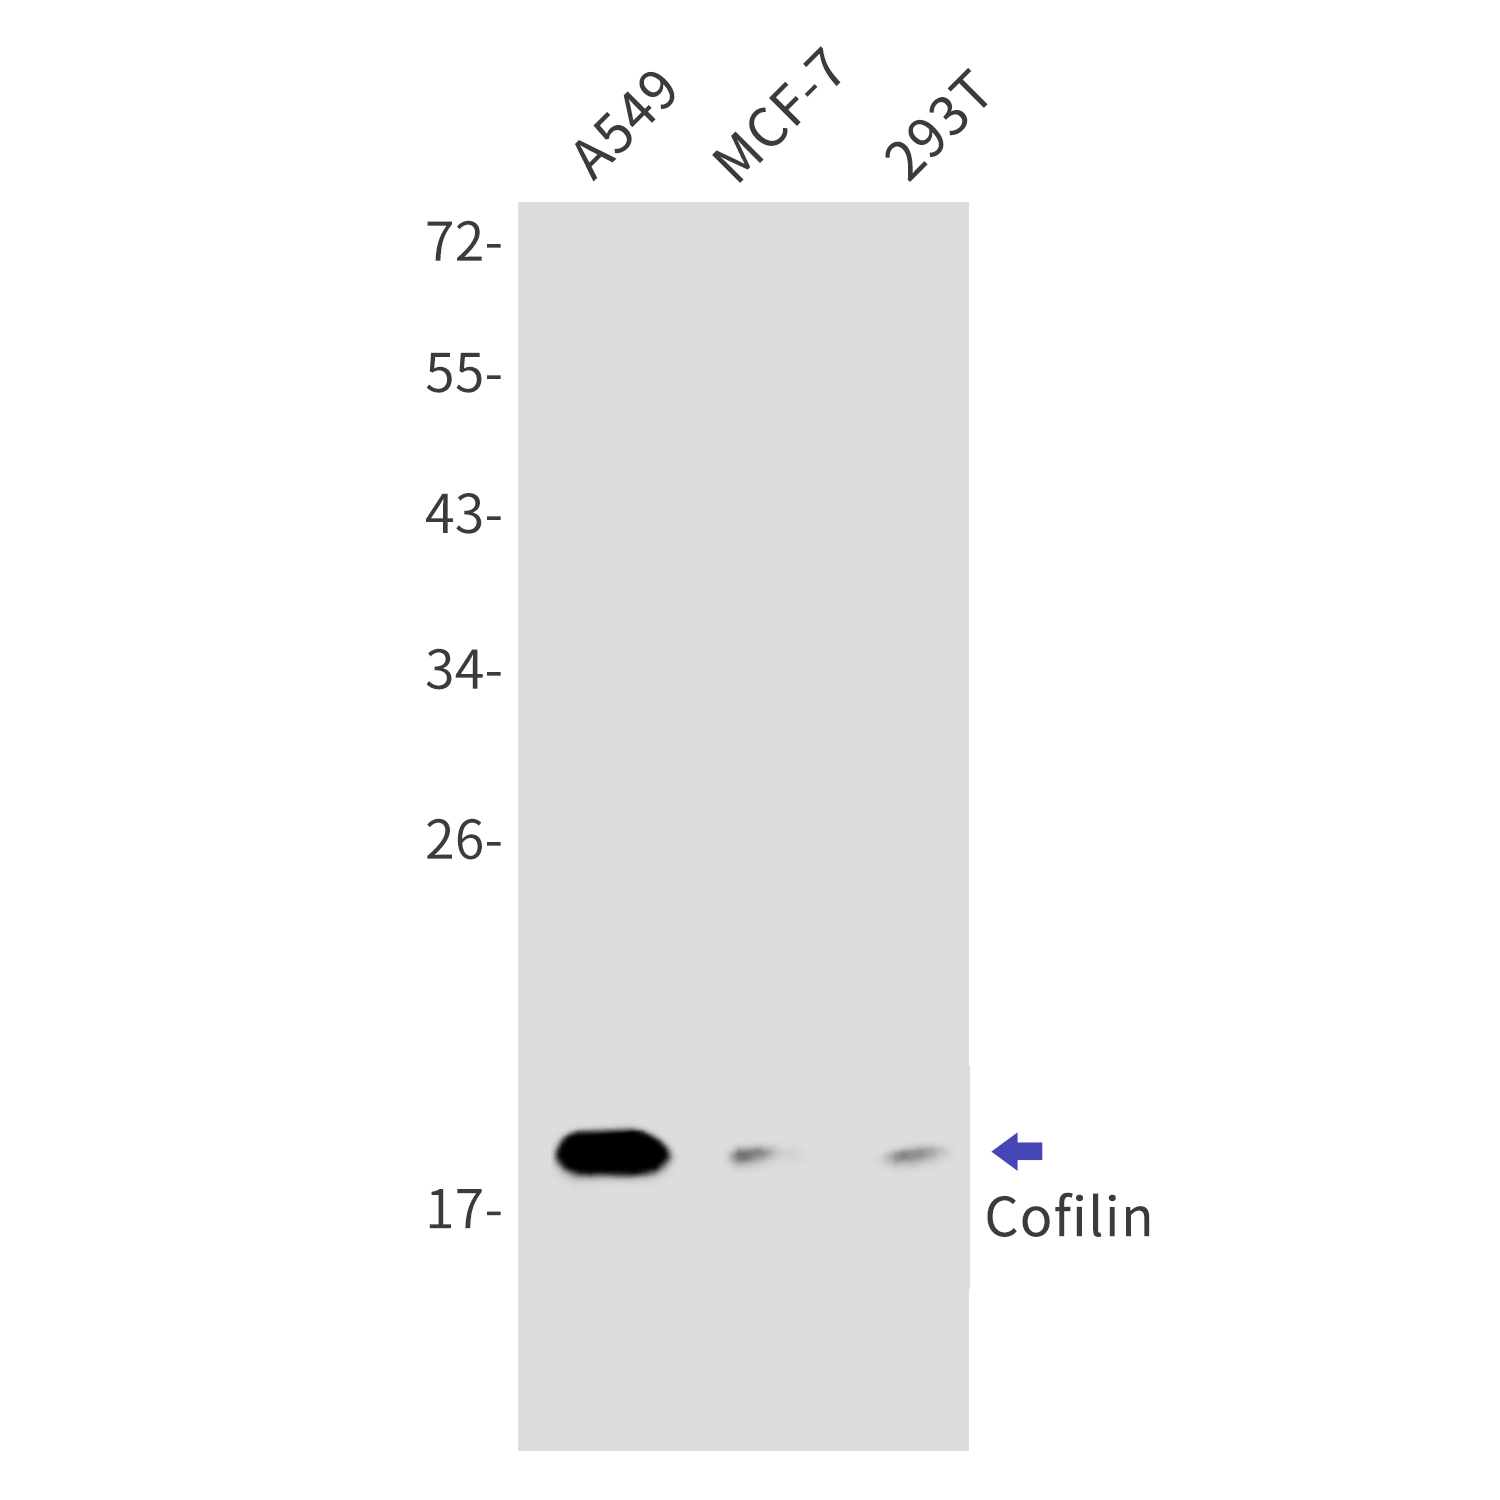 Western blot detection of Cofilin in A549,MCF-7,293T cell lysates using Cofilin Rabbit mAb(1:1000 diluted).Predicted band size:19kDa.Observed band size:19kDa.